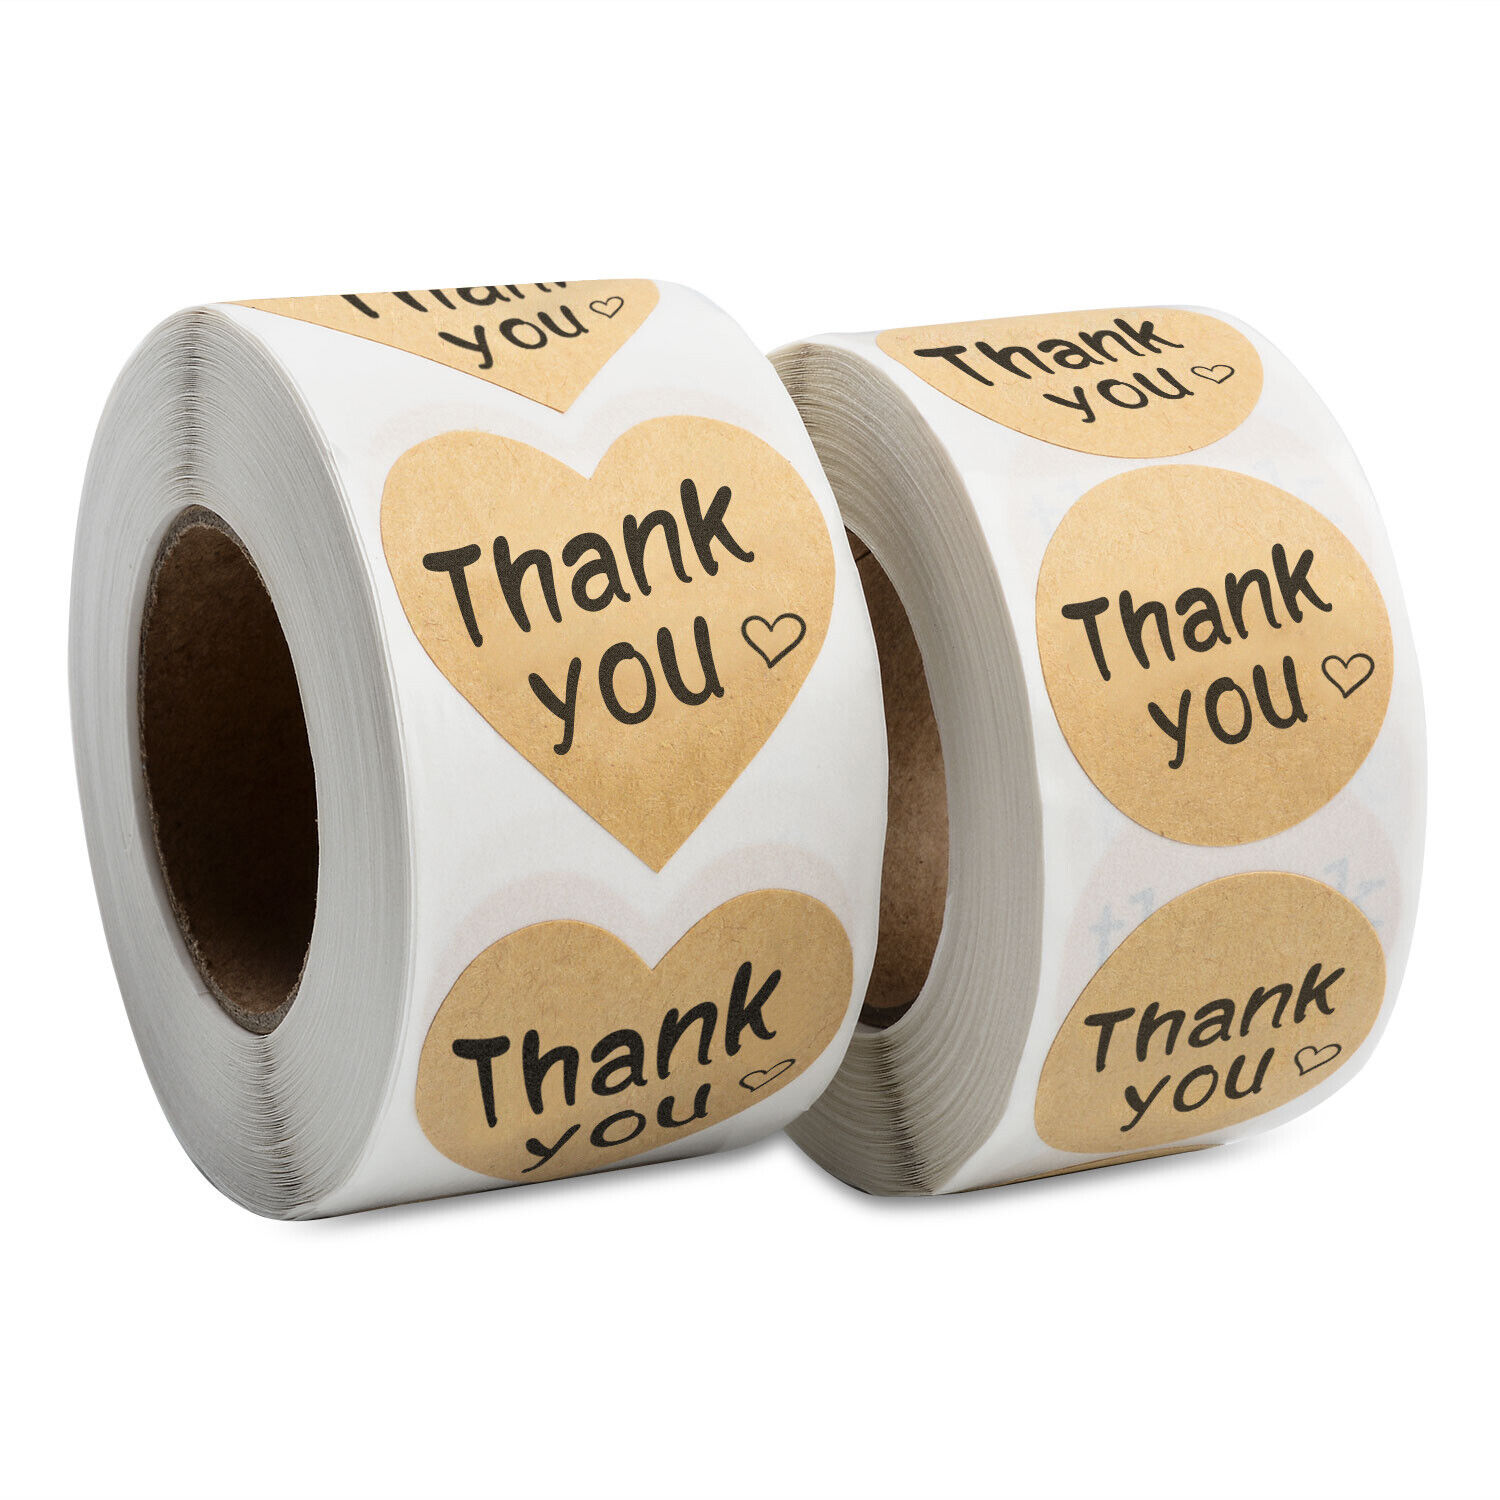 1000 Thank You Stickers Heart Love Shaped Kraft Paper & Round Adhesive Labels Unbranded Does Not Apply